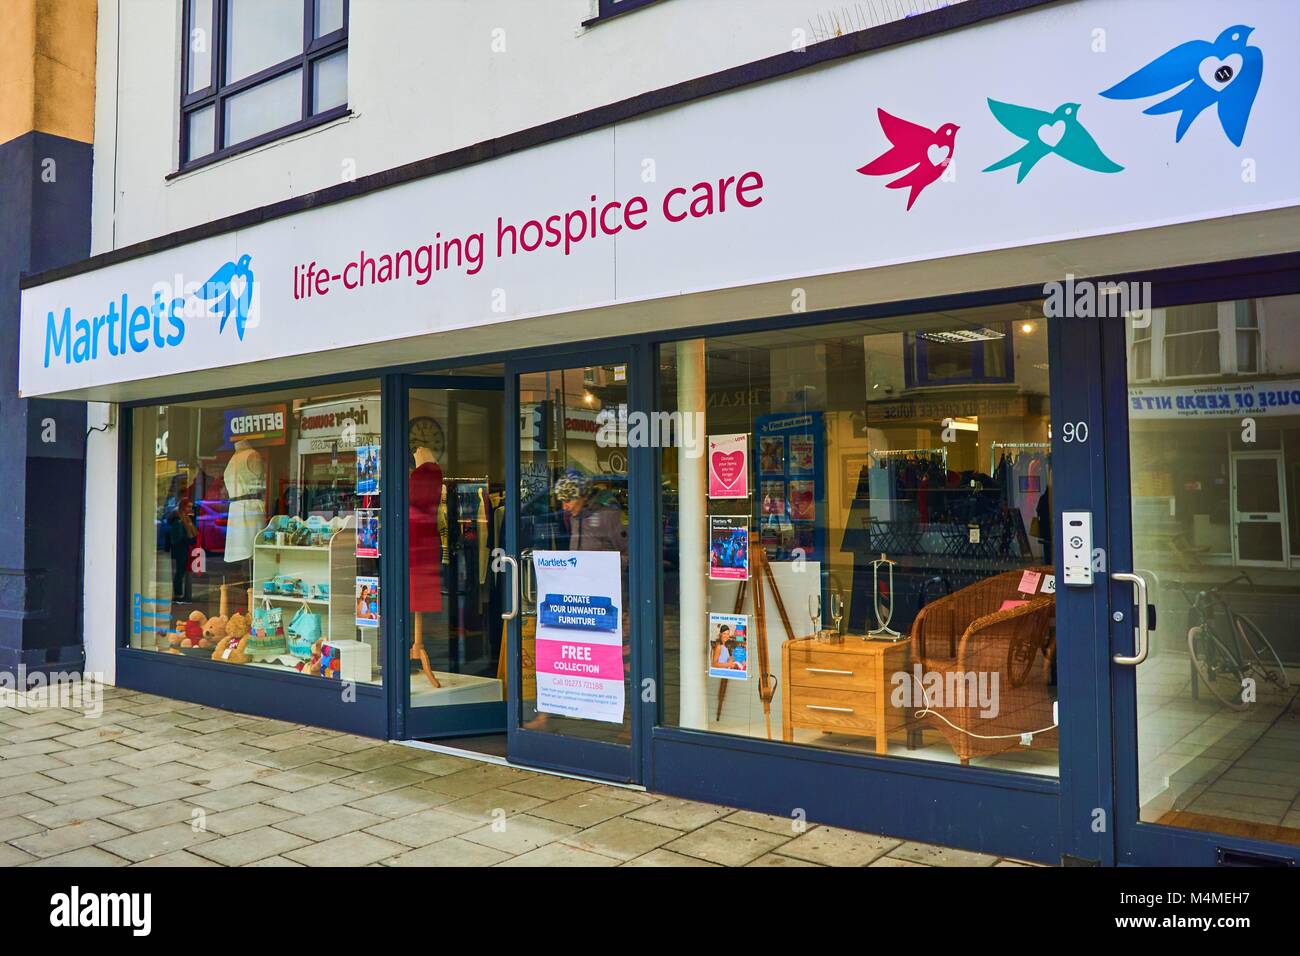 Martlets life changing hospice care, charity shop, Brighton, UK Stock Photo